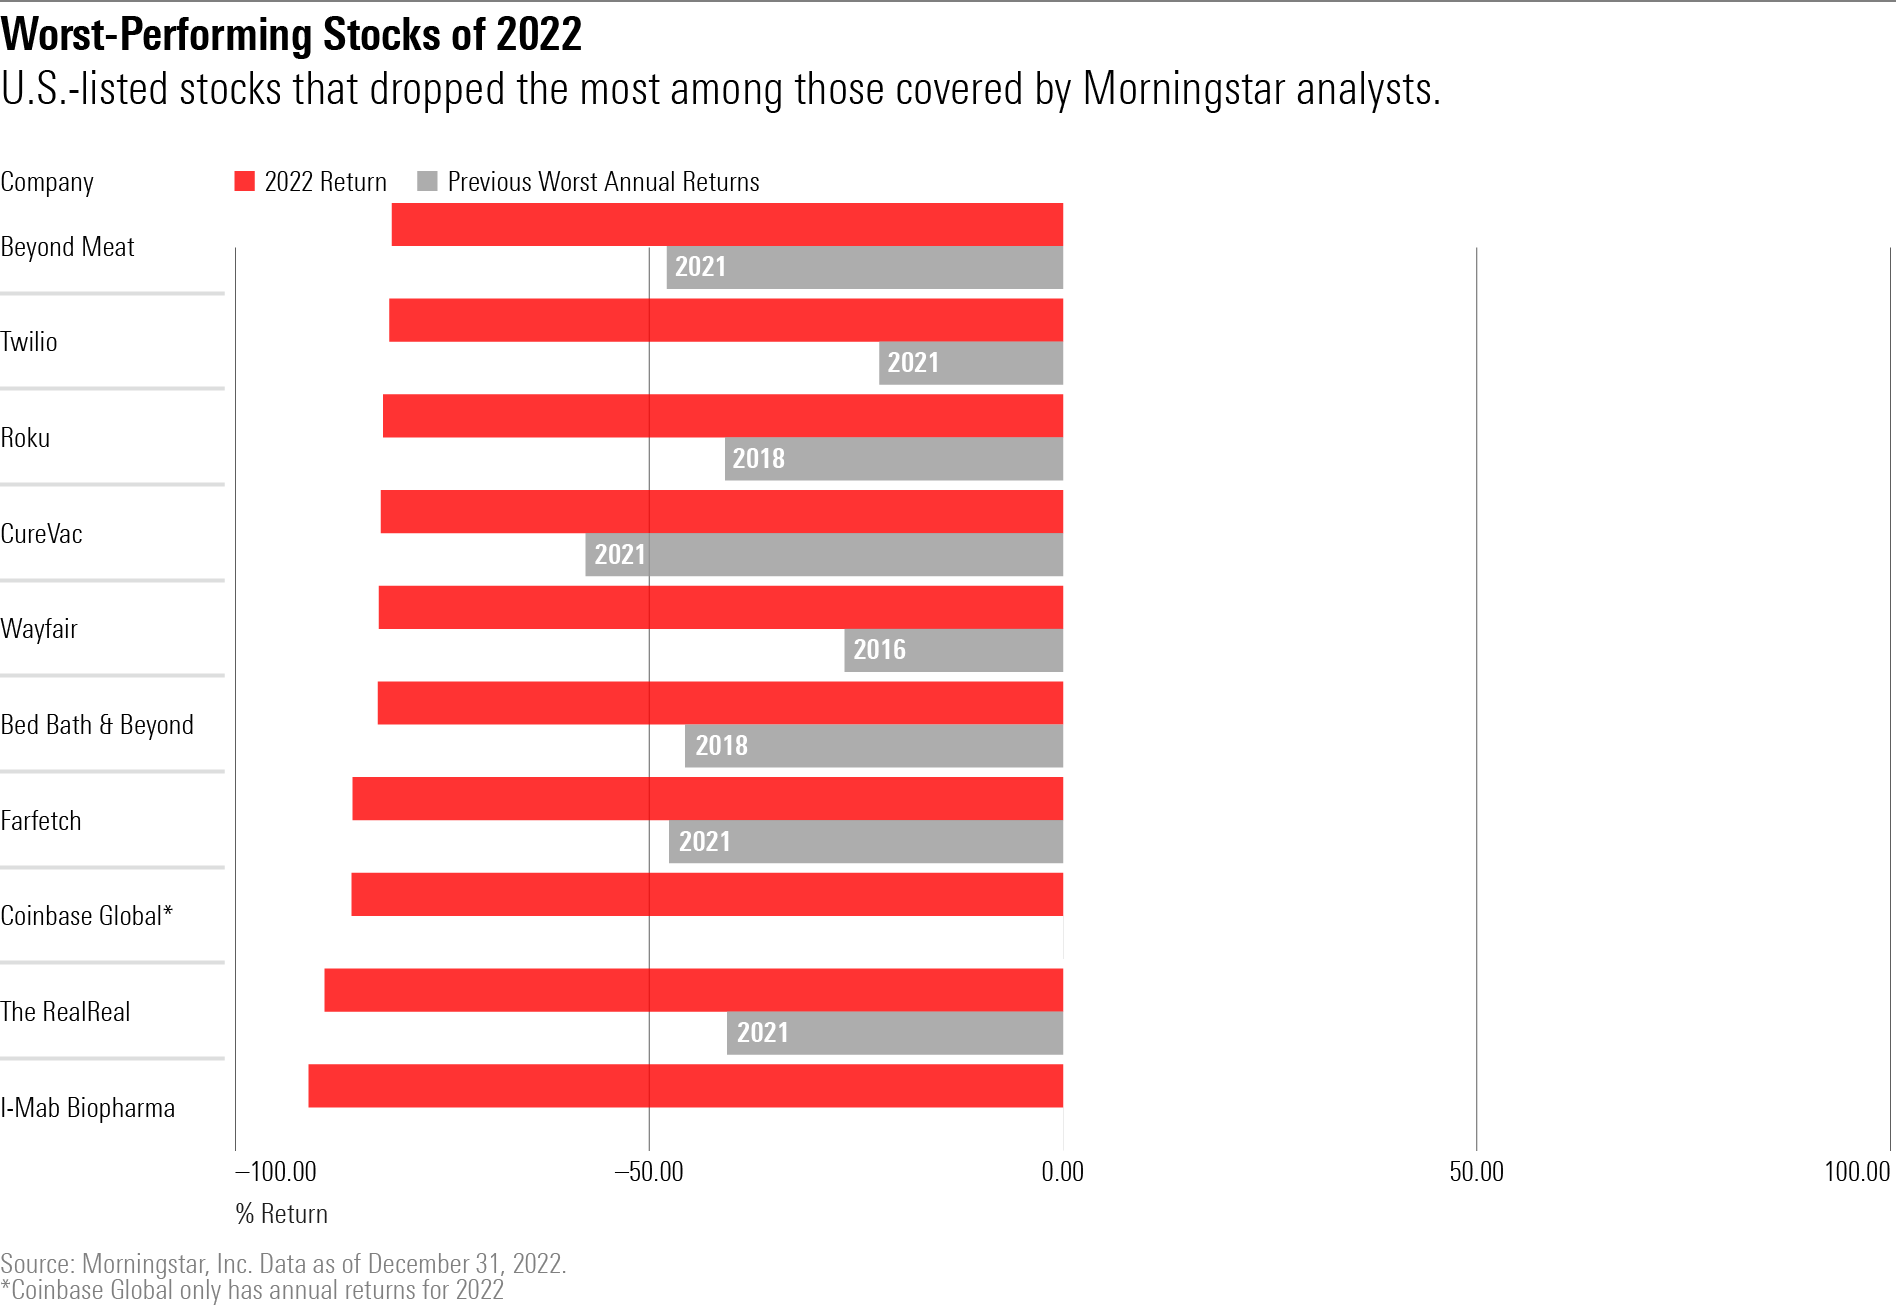 Bar chart showing Worst-Performing Stocks of 2022